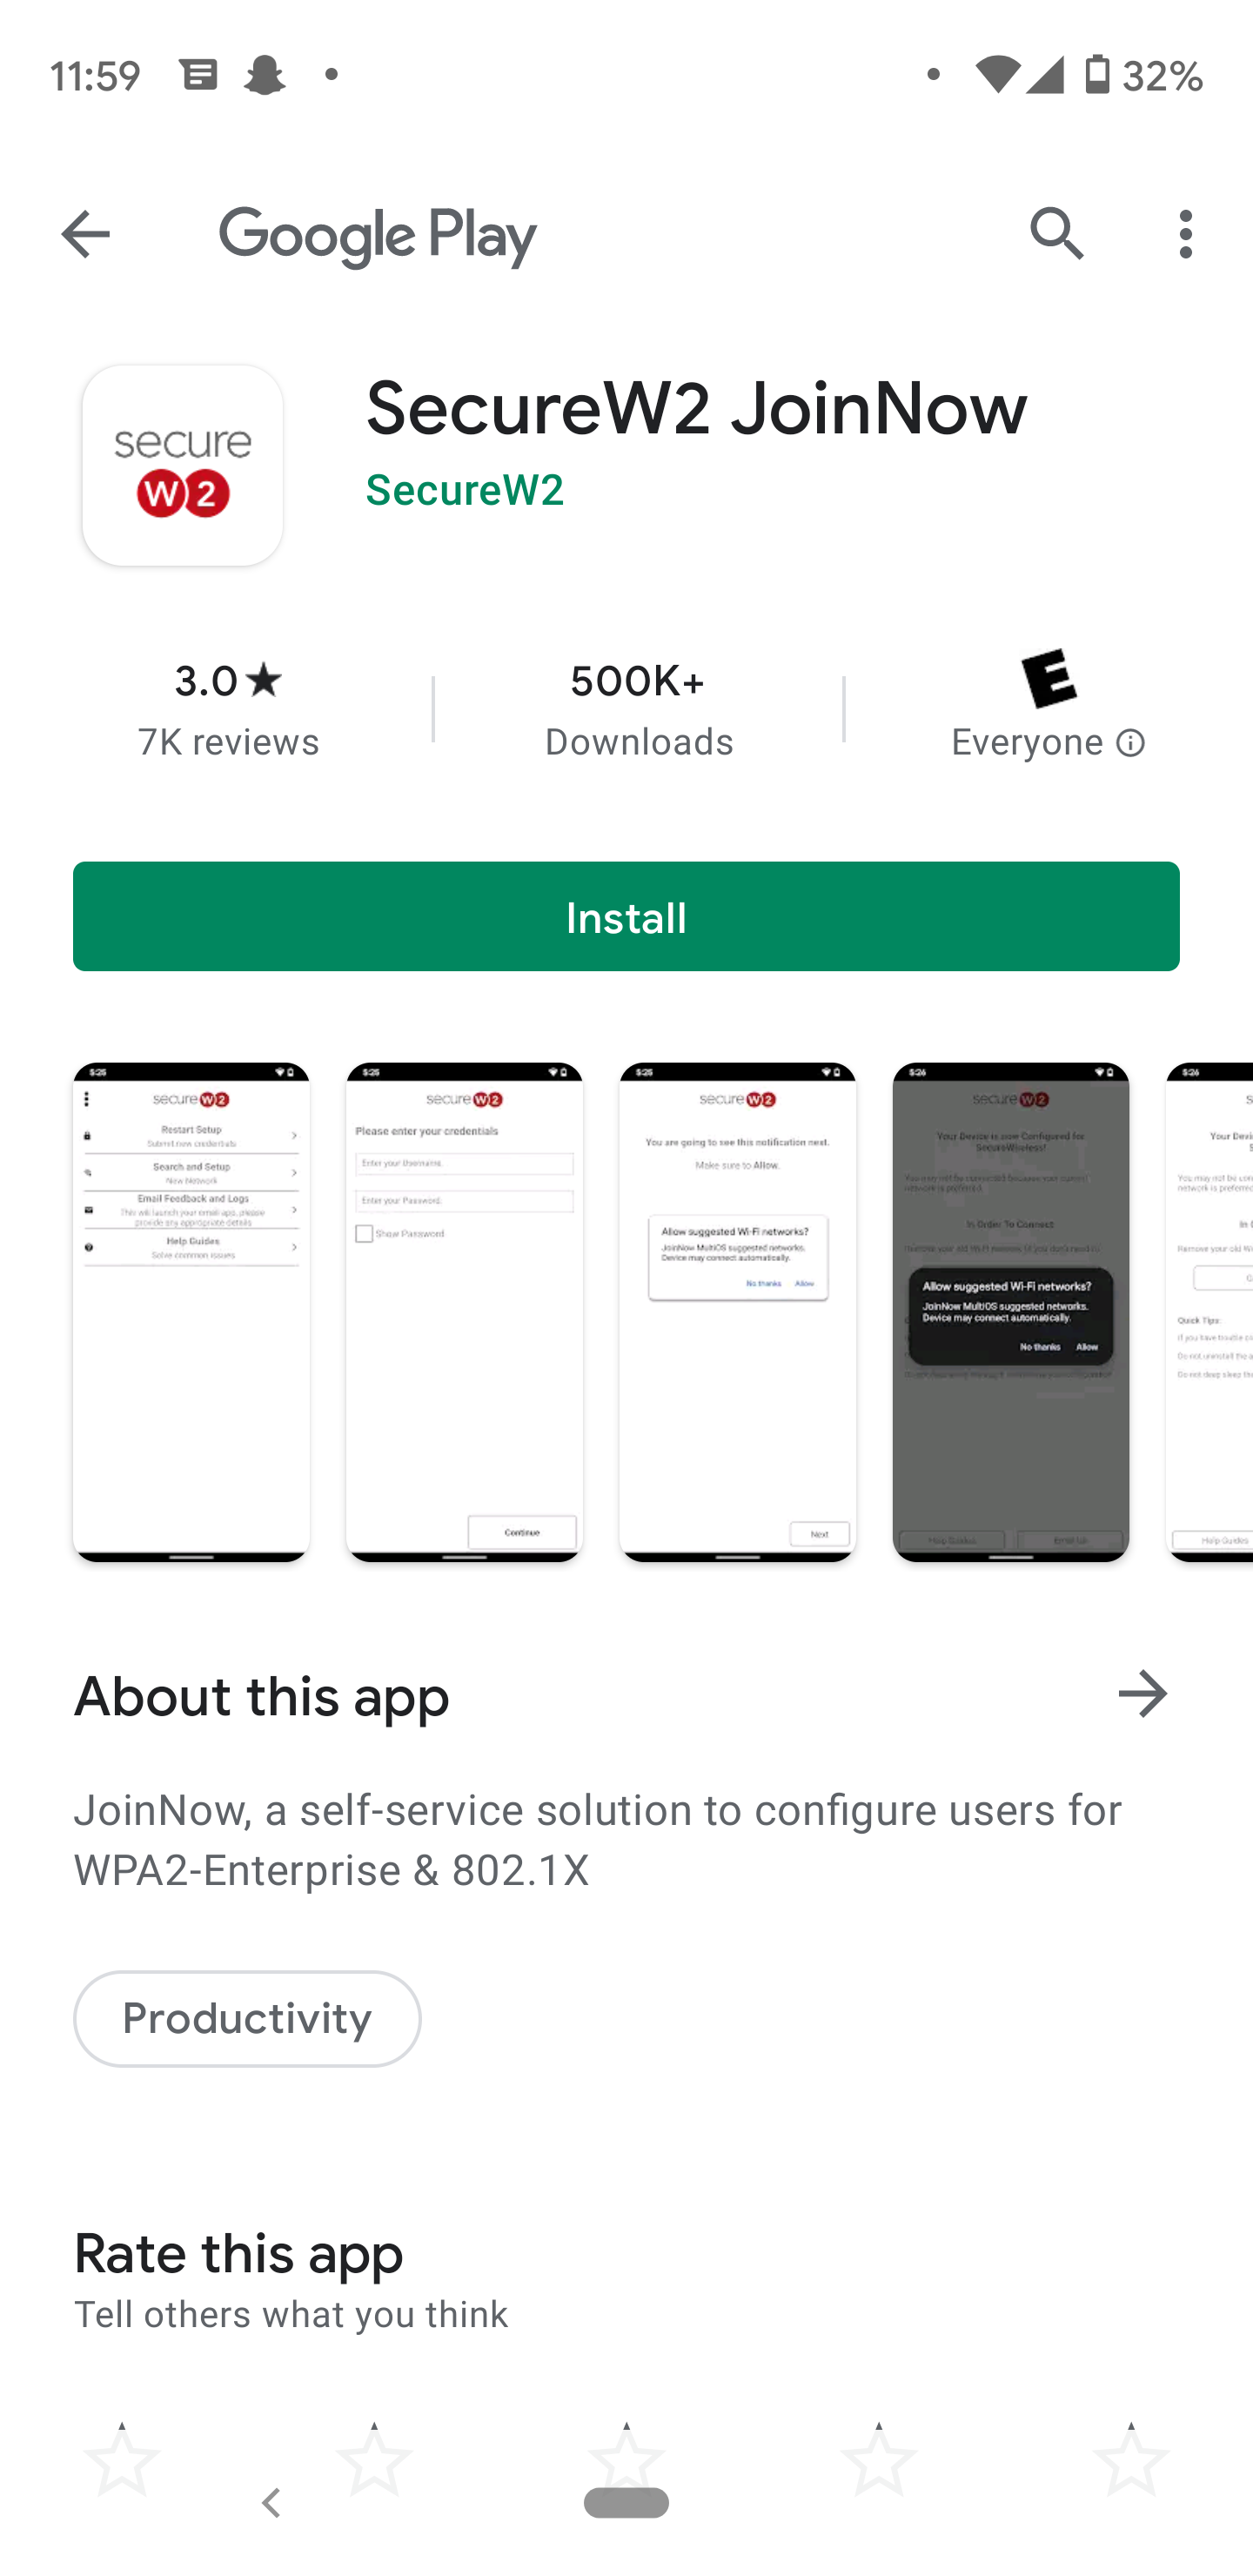 Install the JoinNow app by SecureW2.